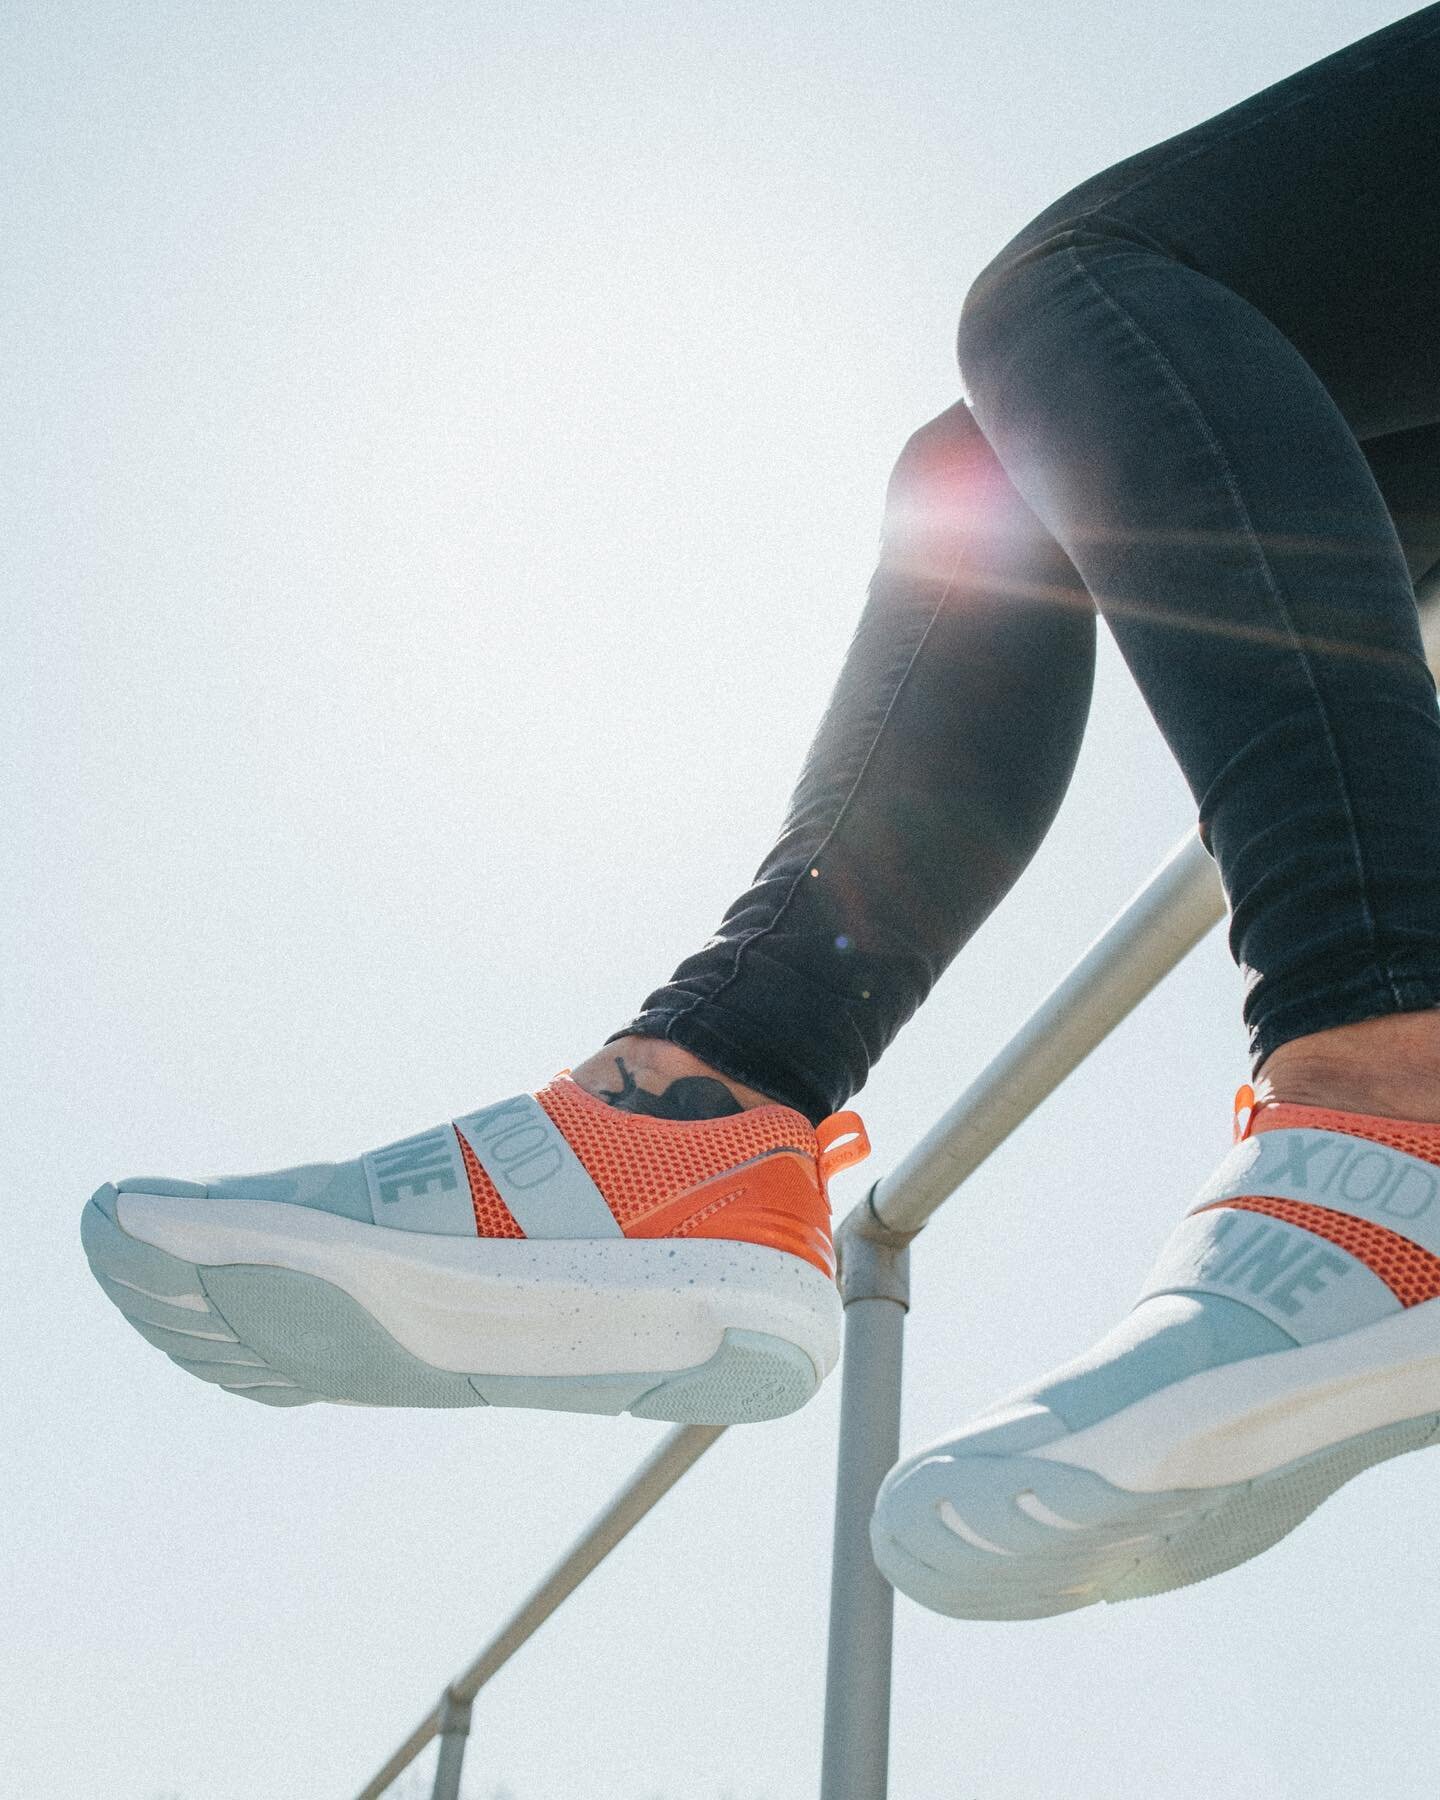 Sunmer is around the corner! ☀️ Now it's the perfect time to spend more time outside - and the new X10D colors are a perfect fit. 💥 The only shoes you need this summer: breathable, comfortable, easy to wear and pretty to look at! Enjoy! 🧡💙

#x10d 